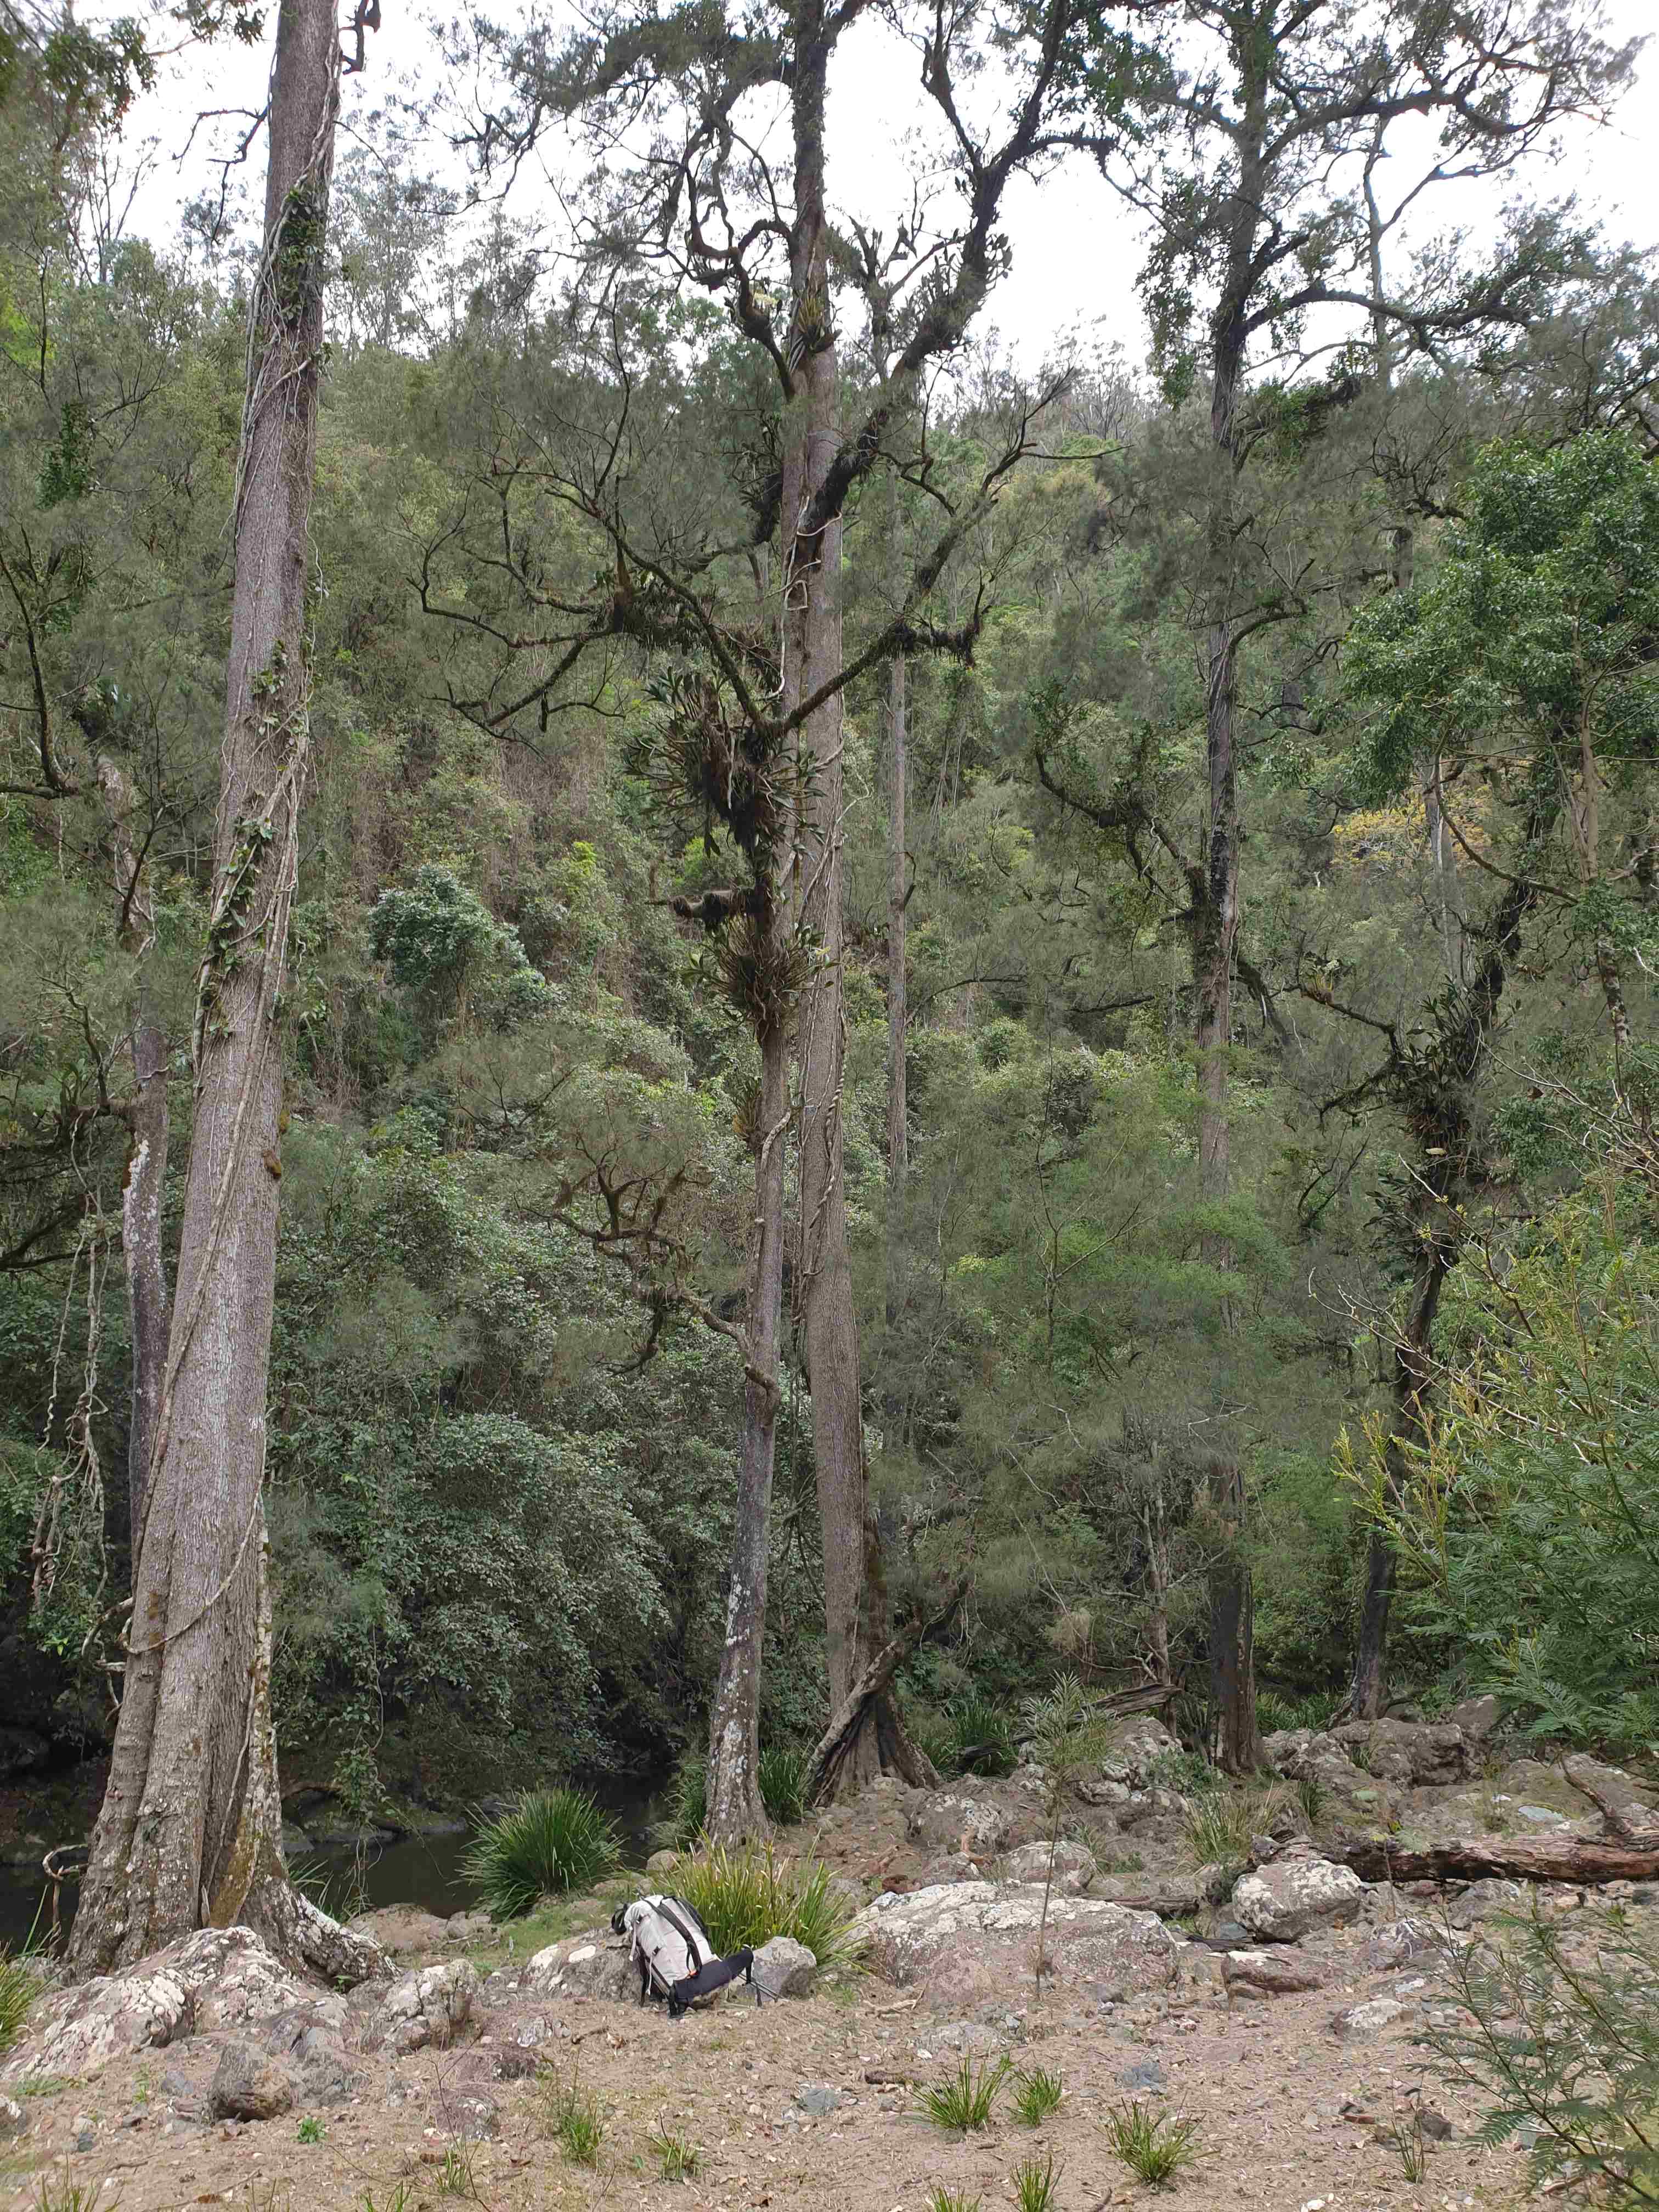 Comfy Myall Creek campsite, mind the dead stinging tree leaves